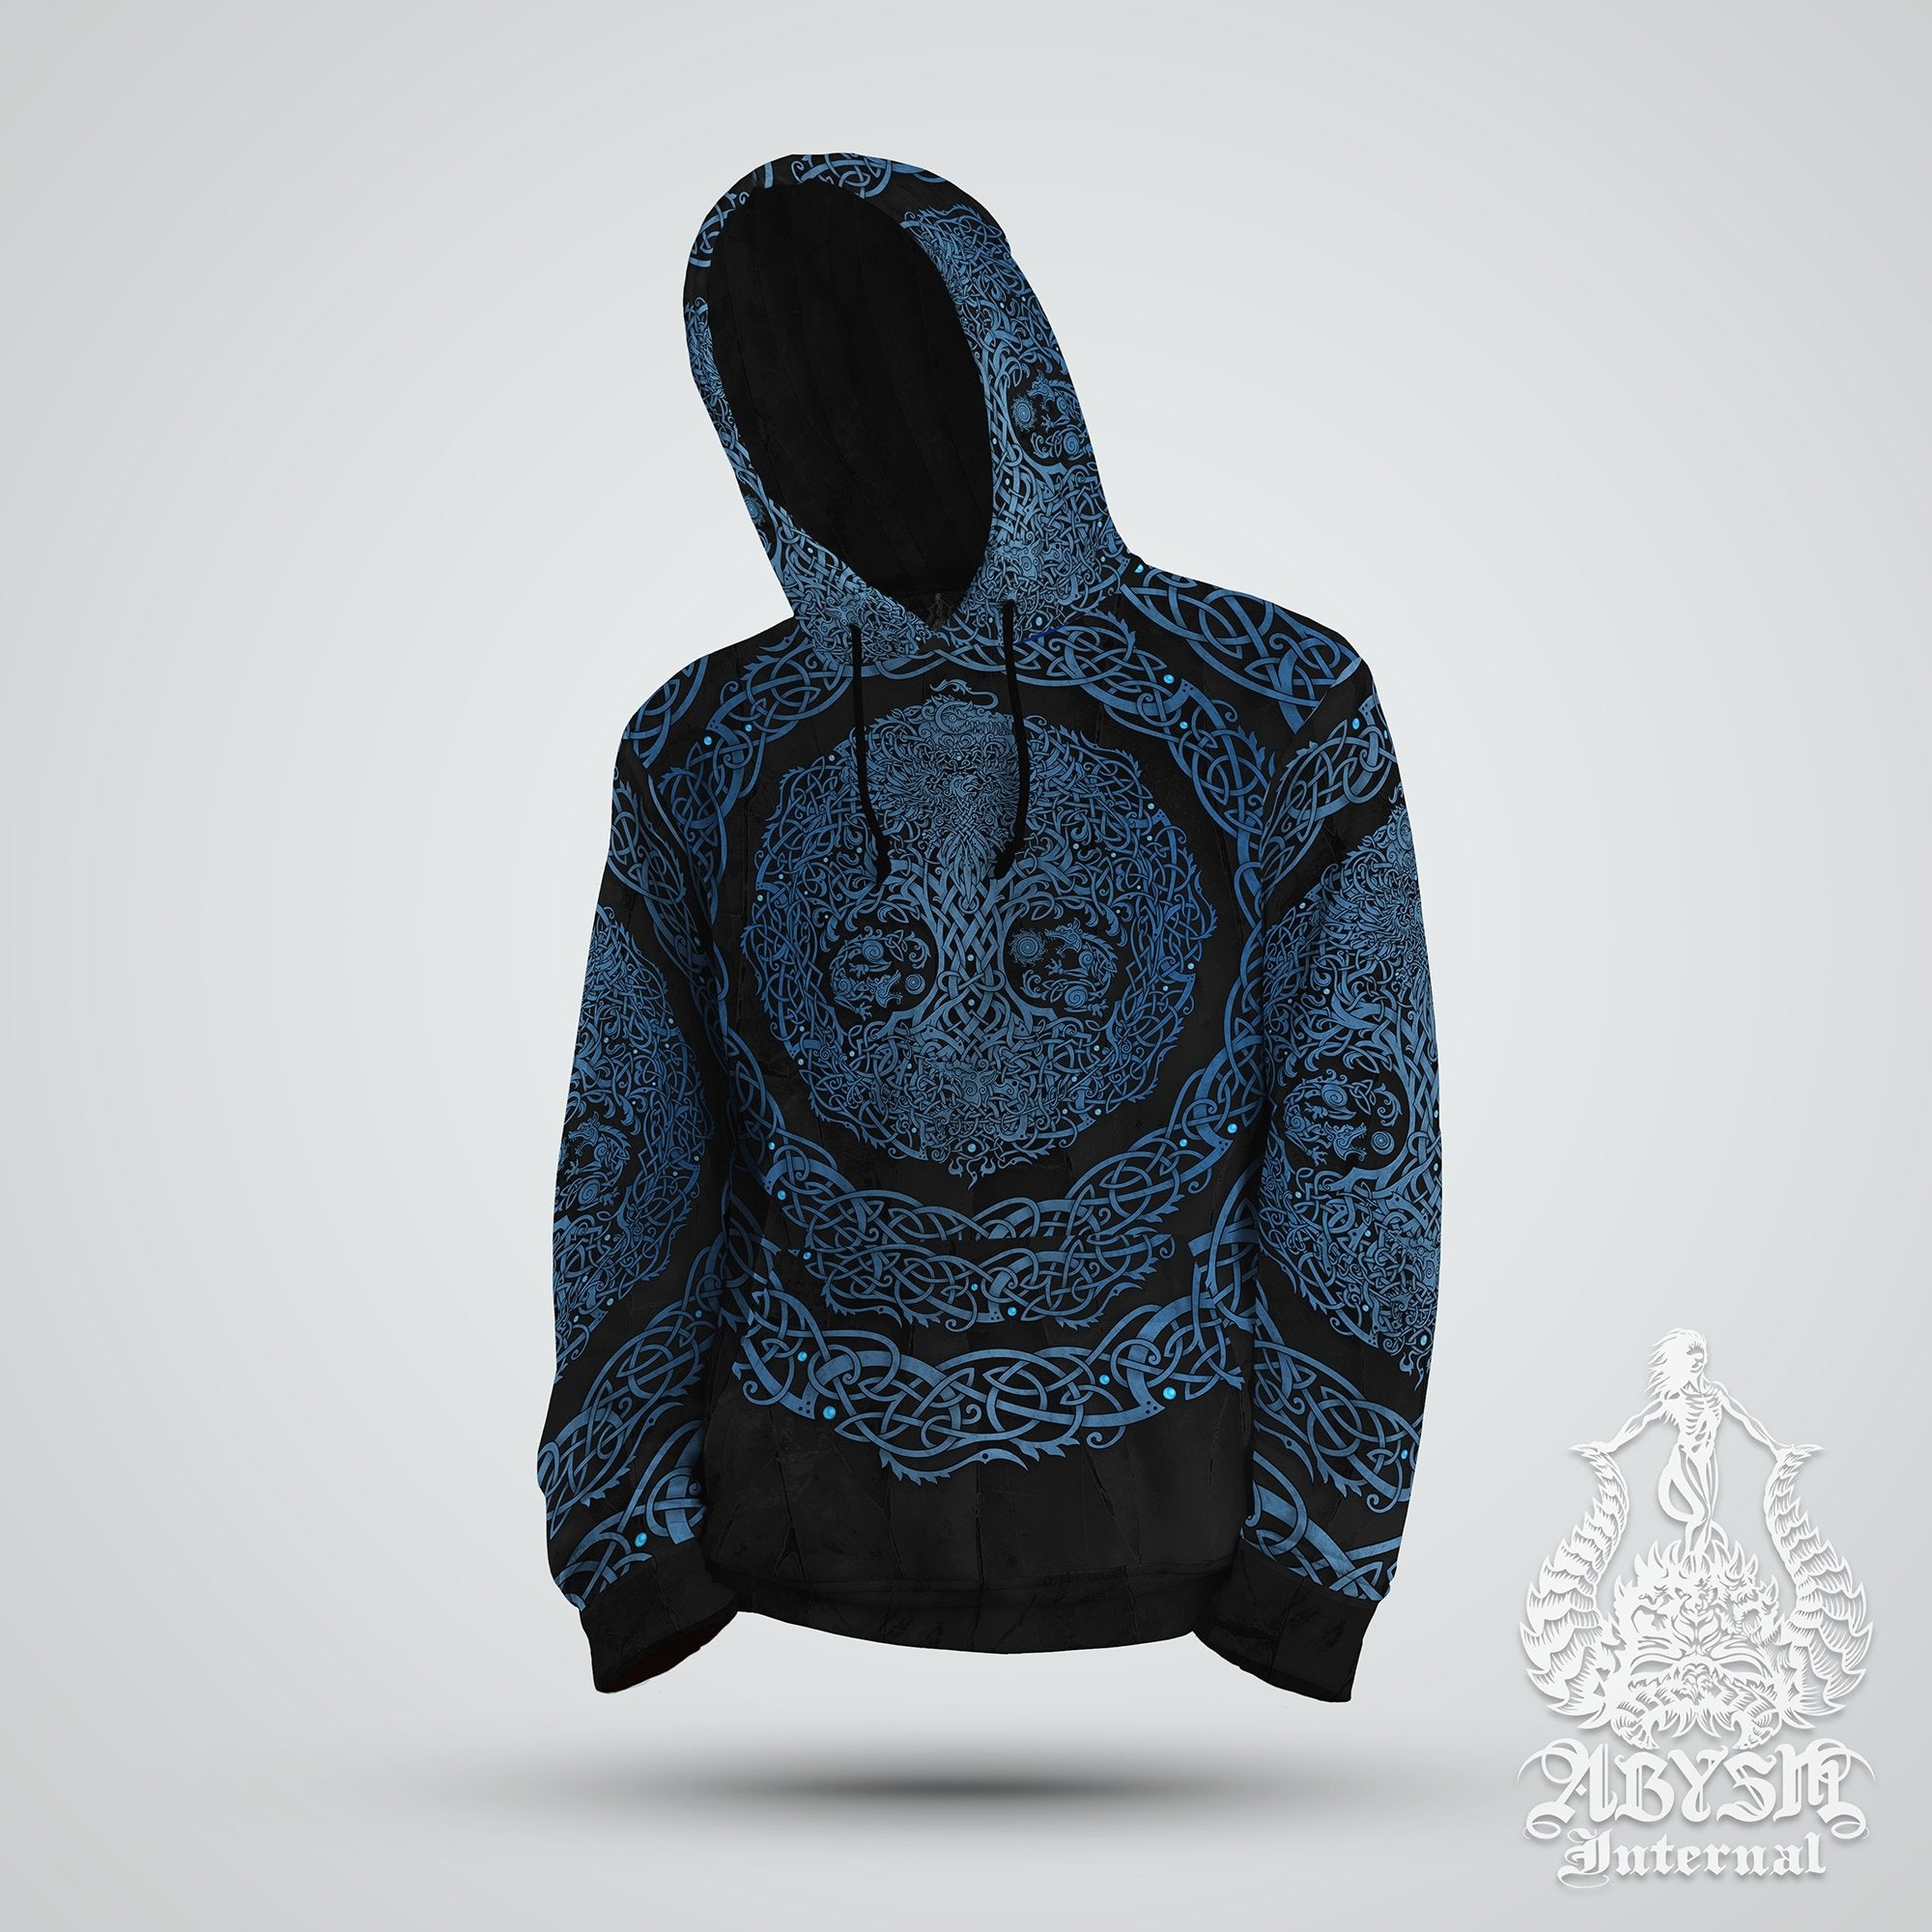 Yggdrasil Hoodie, Viking Sweater, Concert Outfit, Norse Tree of Life, Nordic Art Streetwear, Alternative Clothing, Unisex - Black and Blue - Abysm Internal